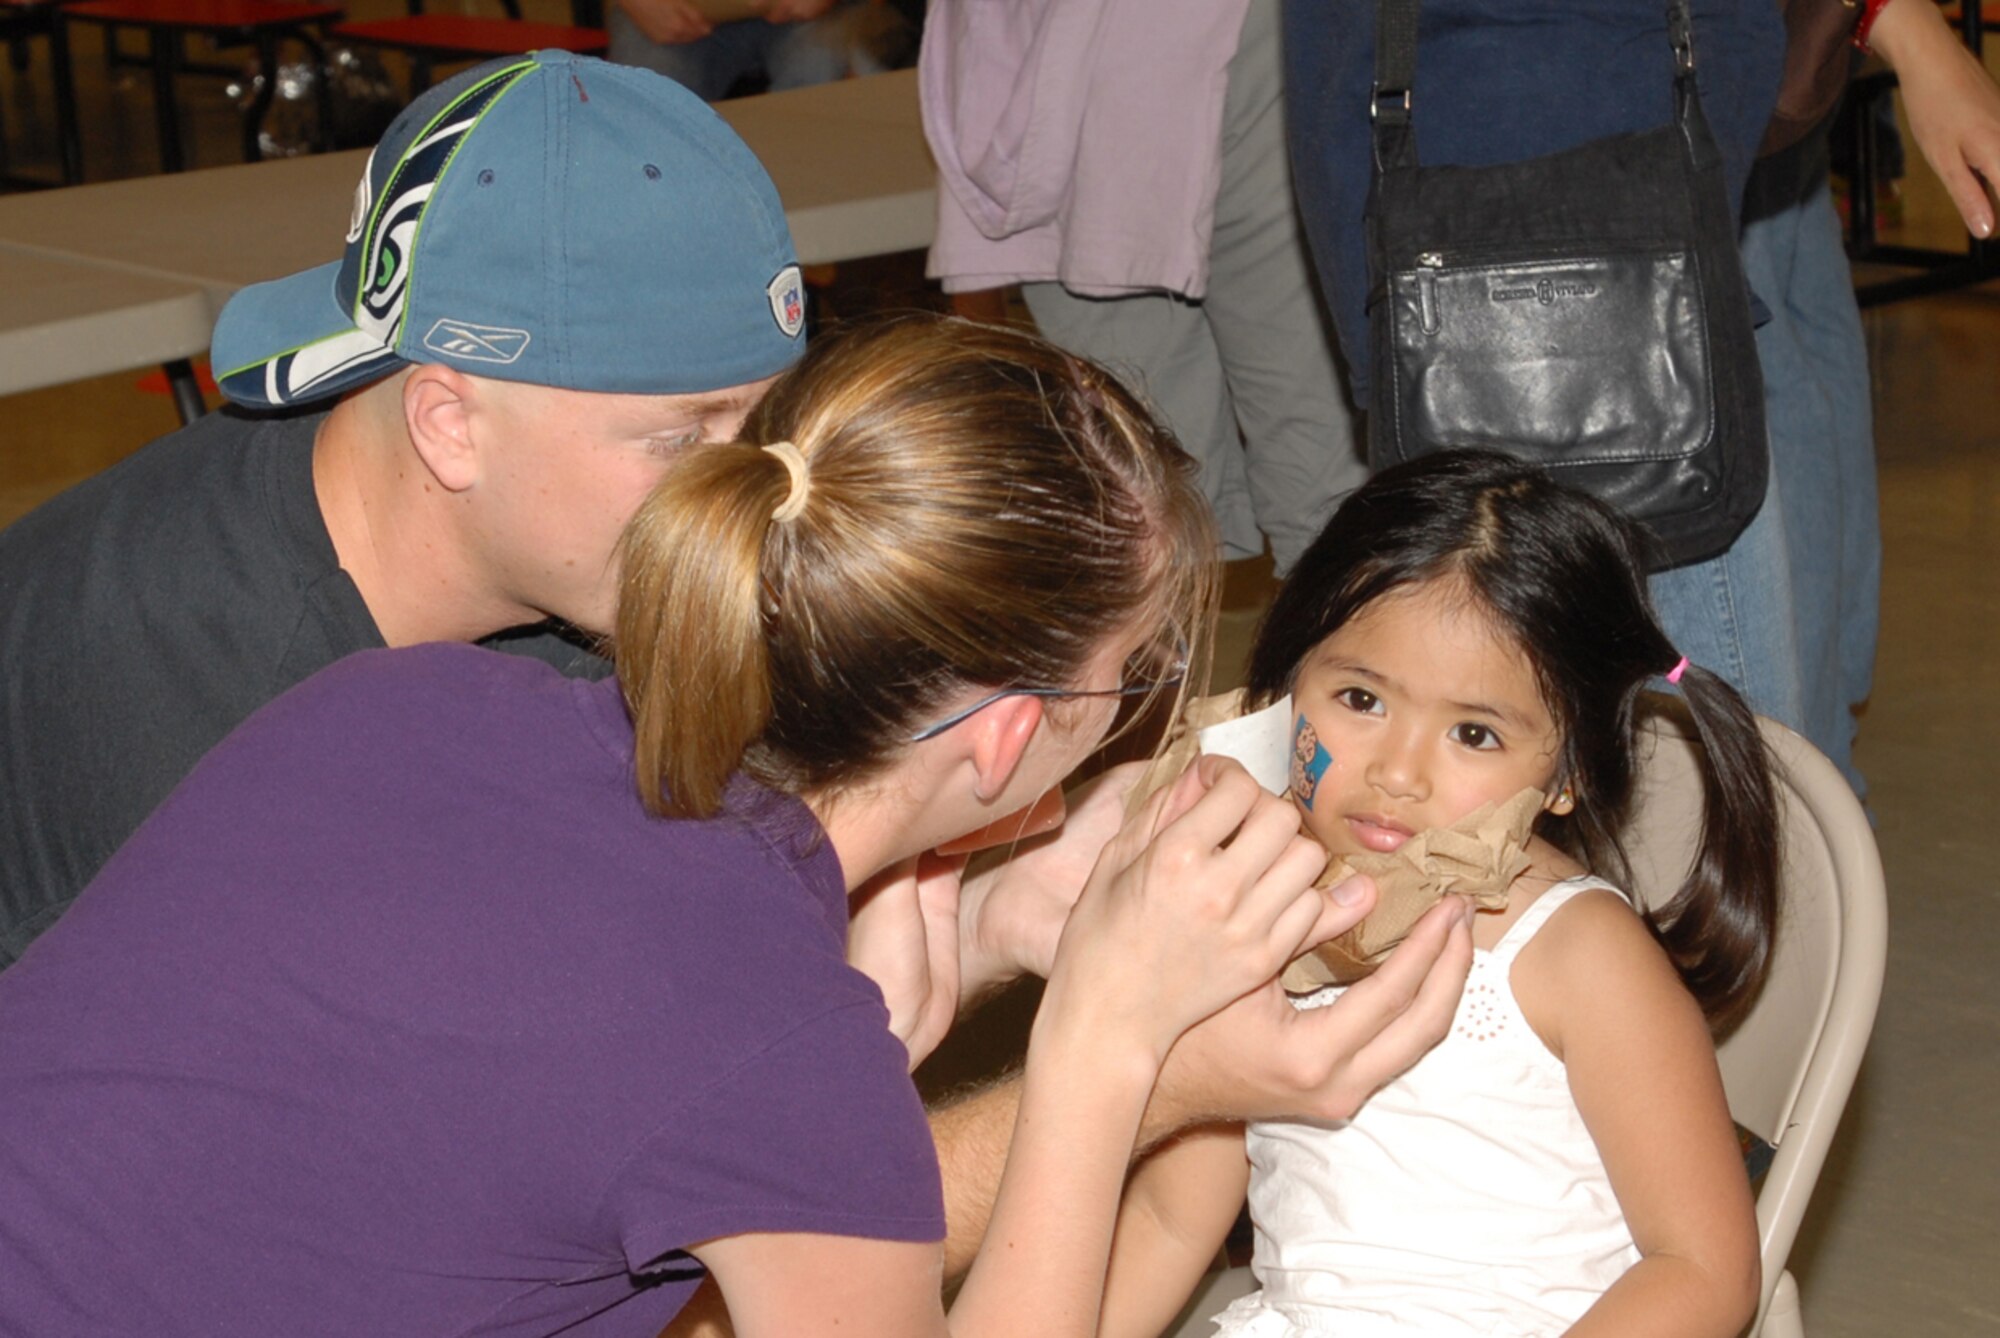 Airman 1st Class Kristy Ramsey (right), 18th Medical Support Squadron, and A1C Jack Ramsey, 18th Communications Squadron, put a fake tattoo on a little girl during the Bob Hope Elementary School end of the year carnival May 24 at Kadena Air Base, Japan.
(U.S. Air Force/Airman 1st Class Kasey Zickmund)